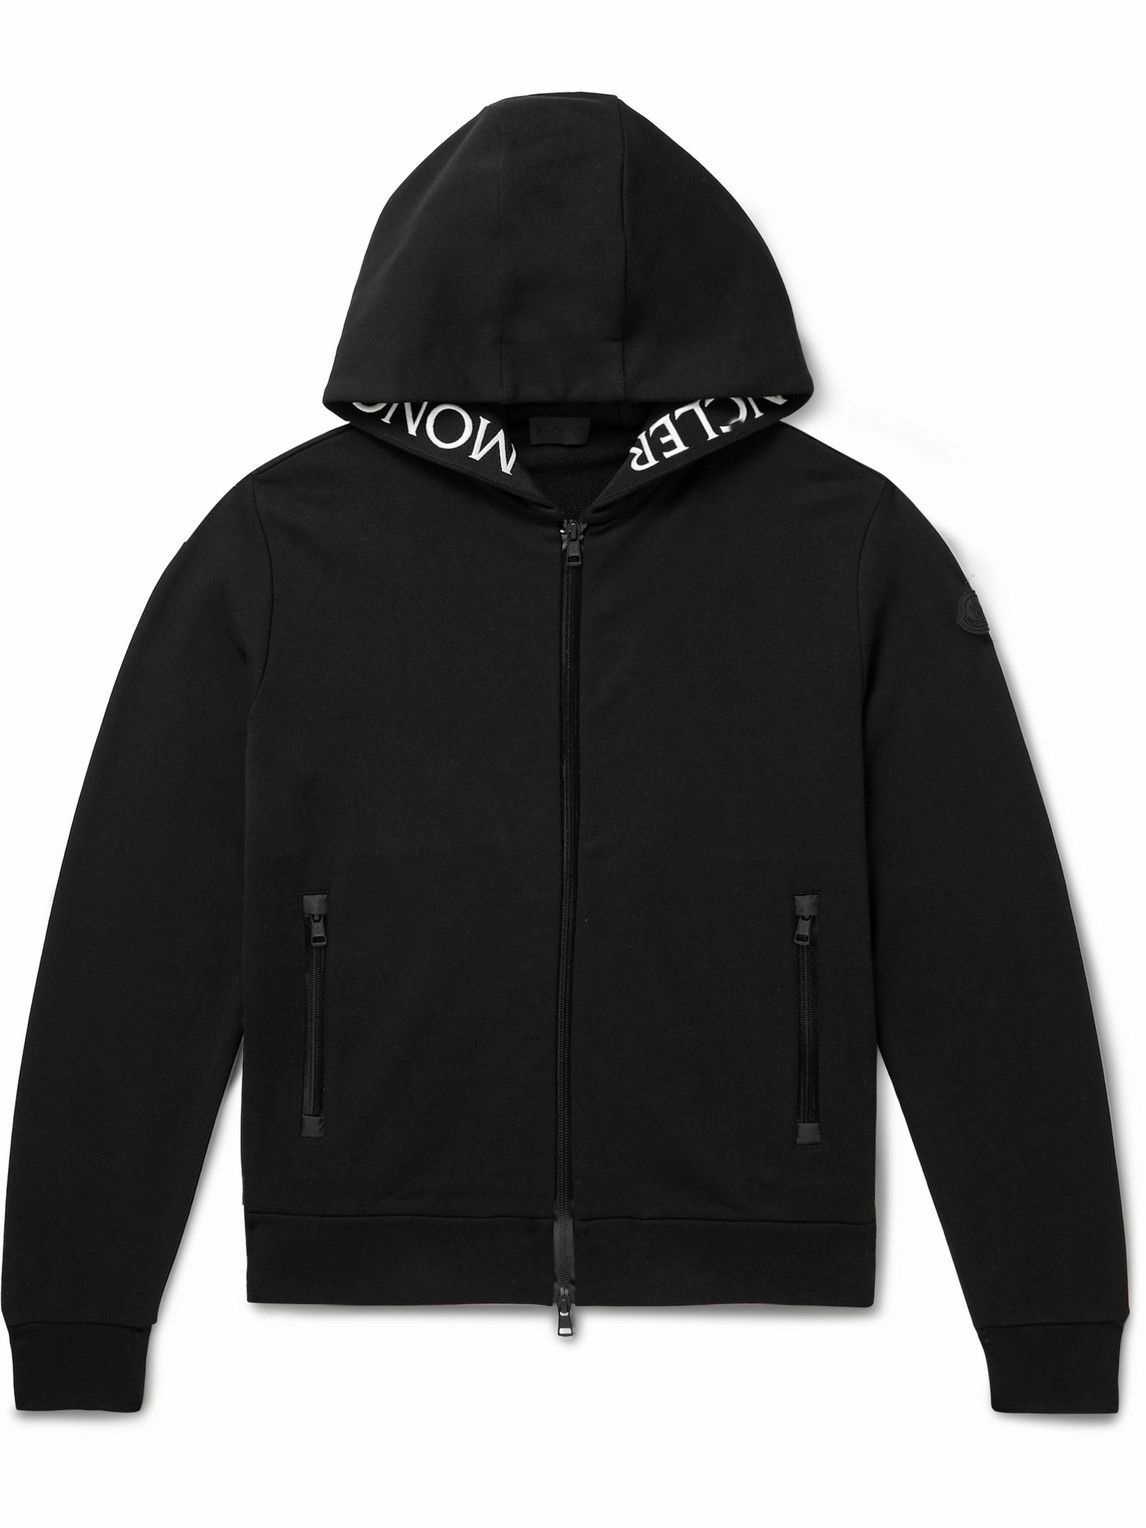 Moncler - Logo-Embroidered Cotton-Jersey Zip-Up Hoodie - Black Moncler